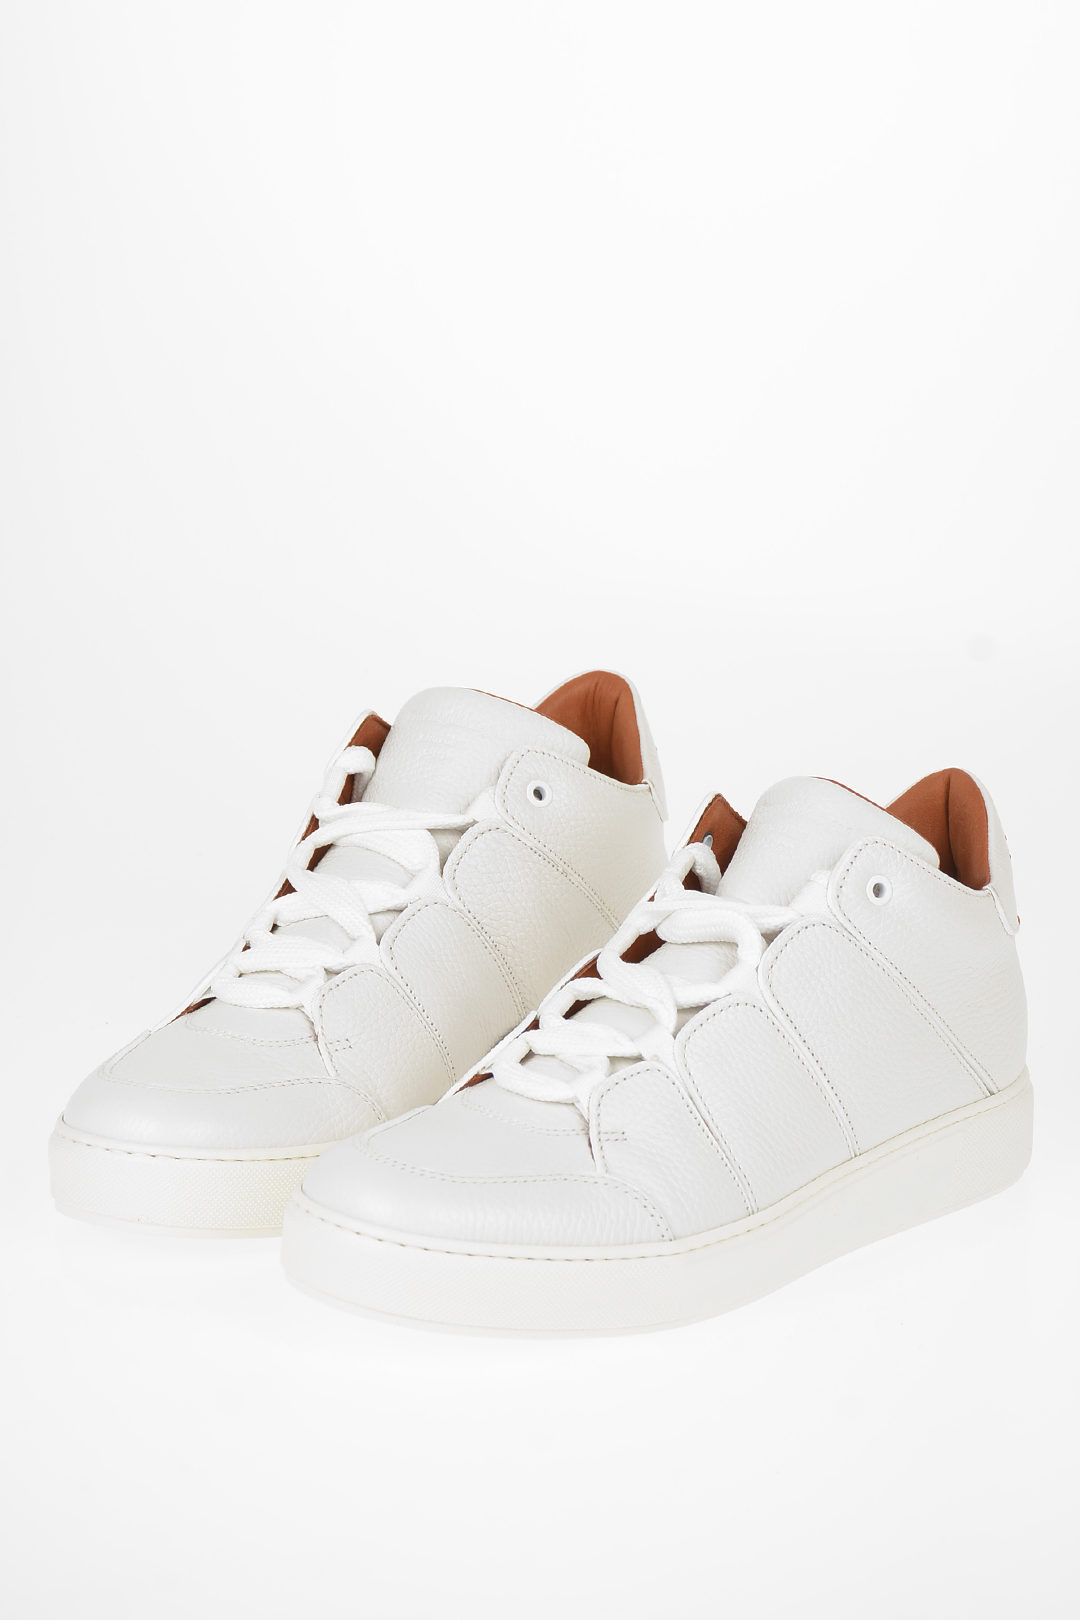 COUTURE LEather TIZIANO Sneakers